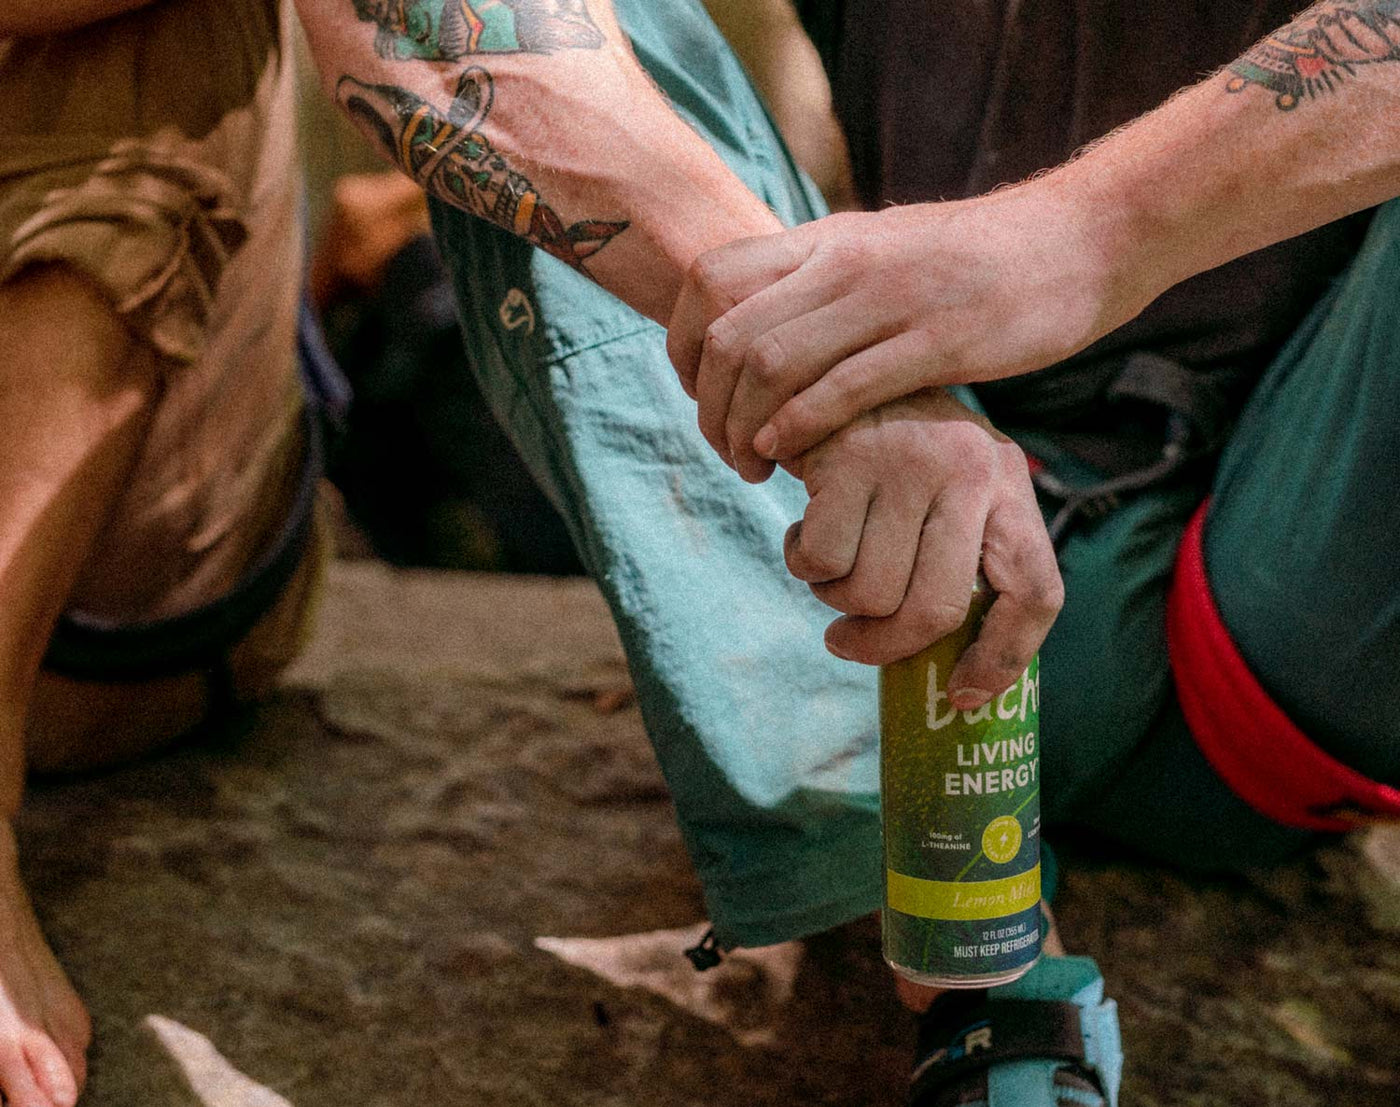 Tattooed person holds a can of Living Energy while rock climbing